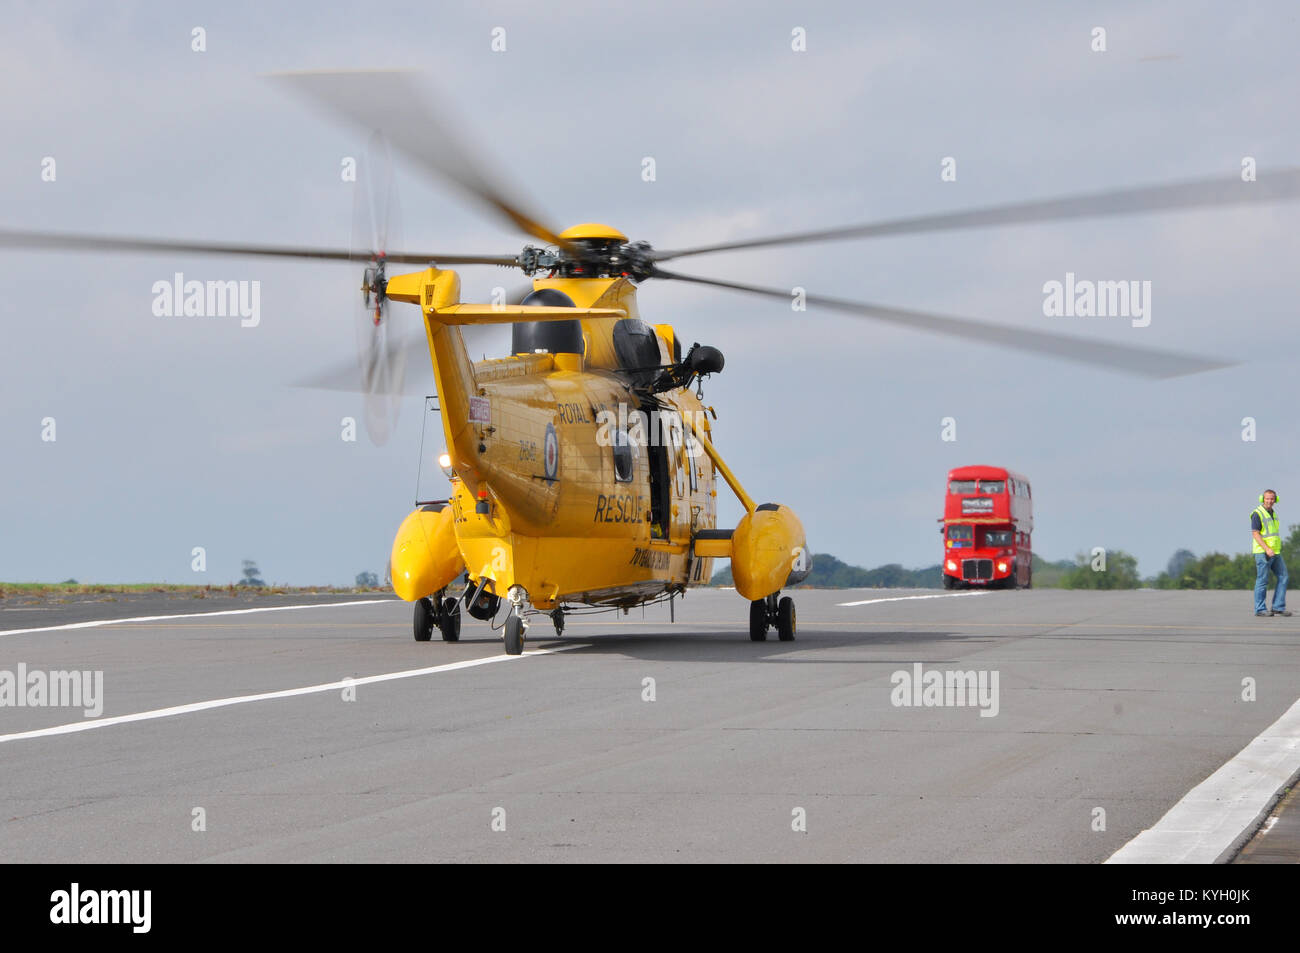 RAF Westland Sea King helicopter heading towards a red London bus on a taxiway at Biggin Hill Airport Stock Photo